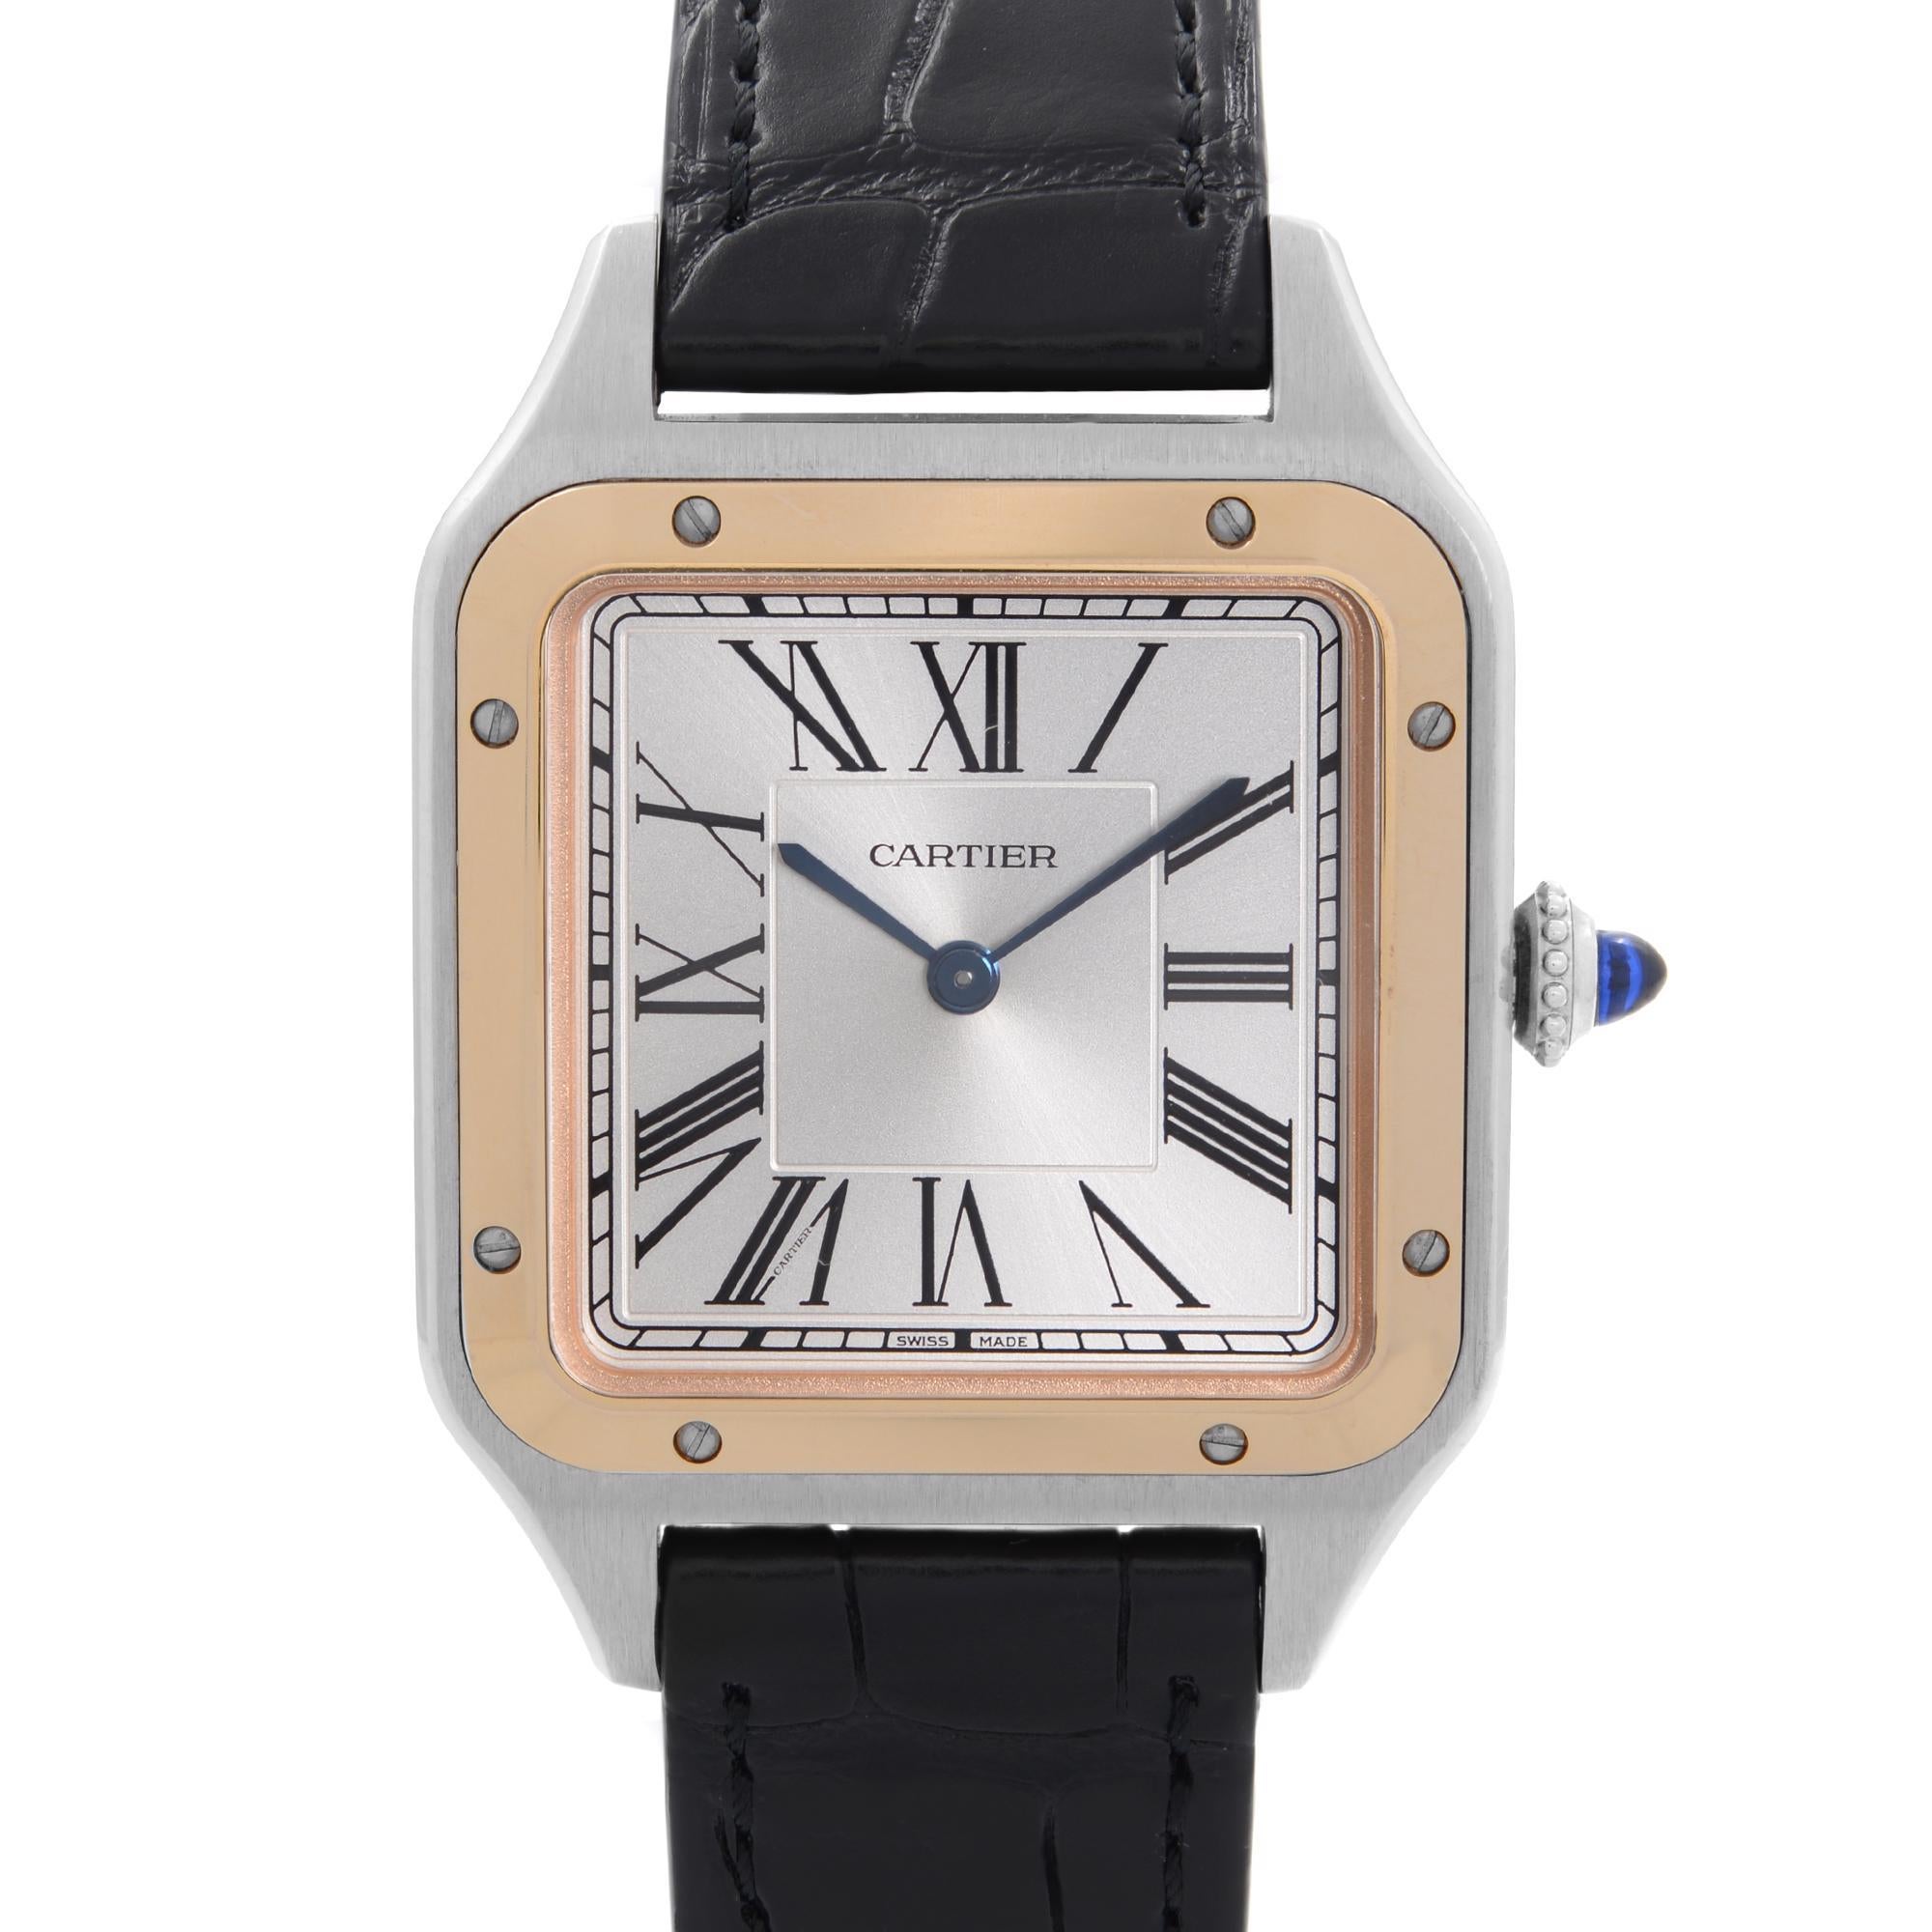 Display Model Cartier W2SA0011. The band has a little damage around adjustable holes. This Beautiful Timepiece is Powered by Quartz (battery) Movement And Features: Stainless Steel Case with Black Leather Strap. Fixed 18k Rose Gold Bezel. Silver